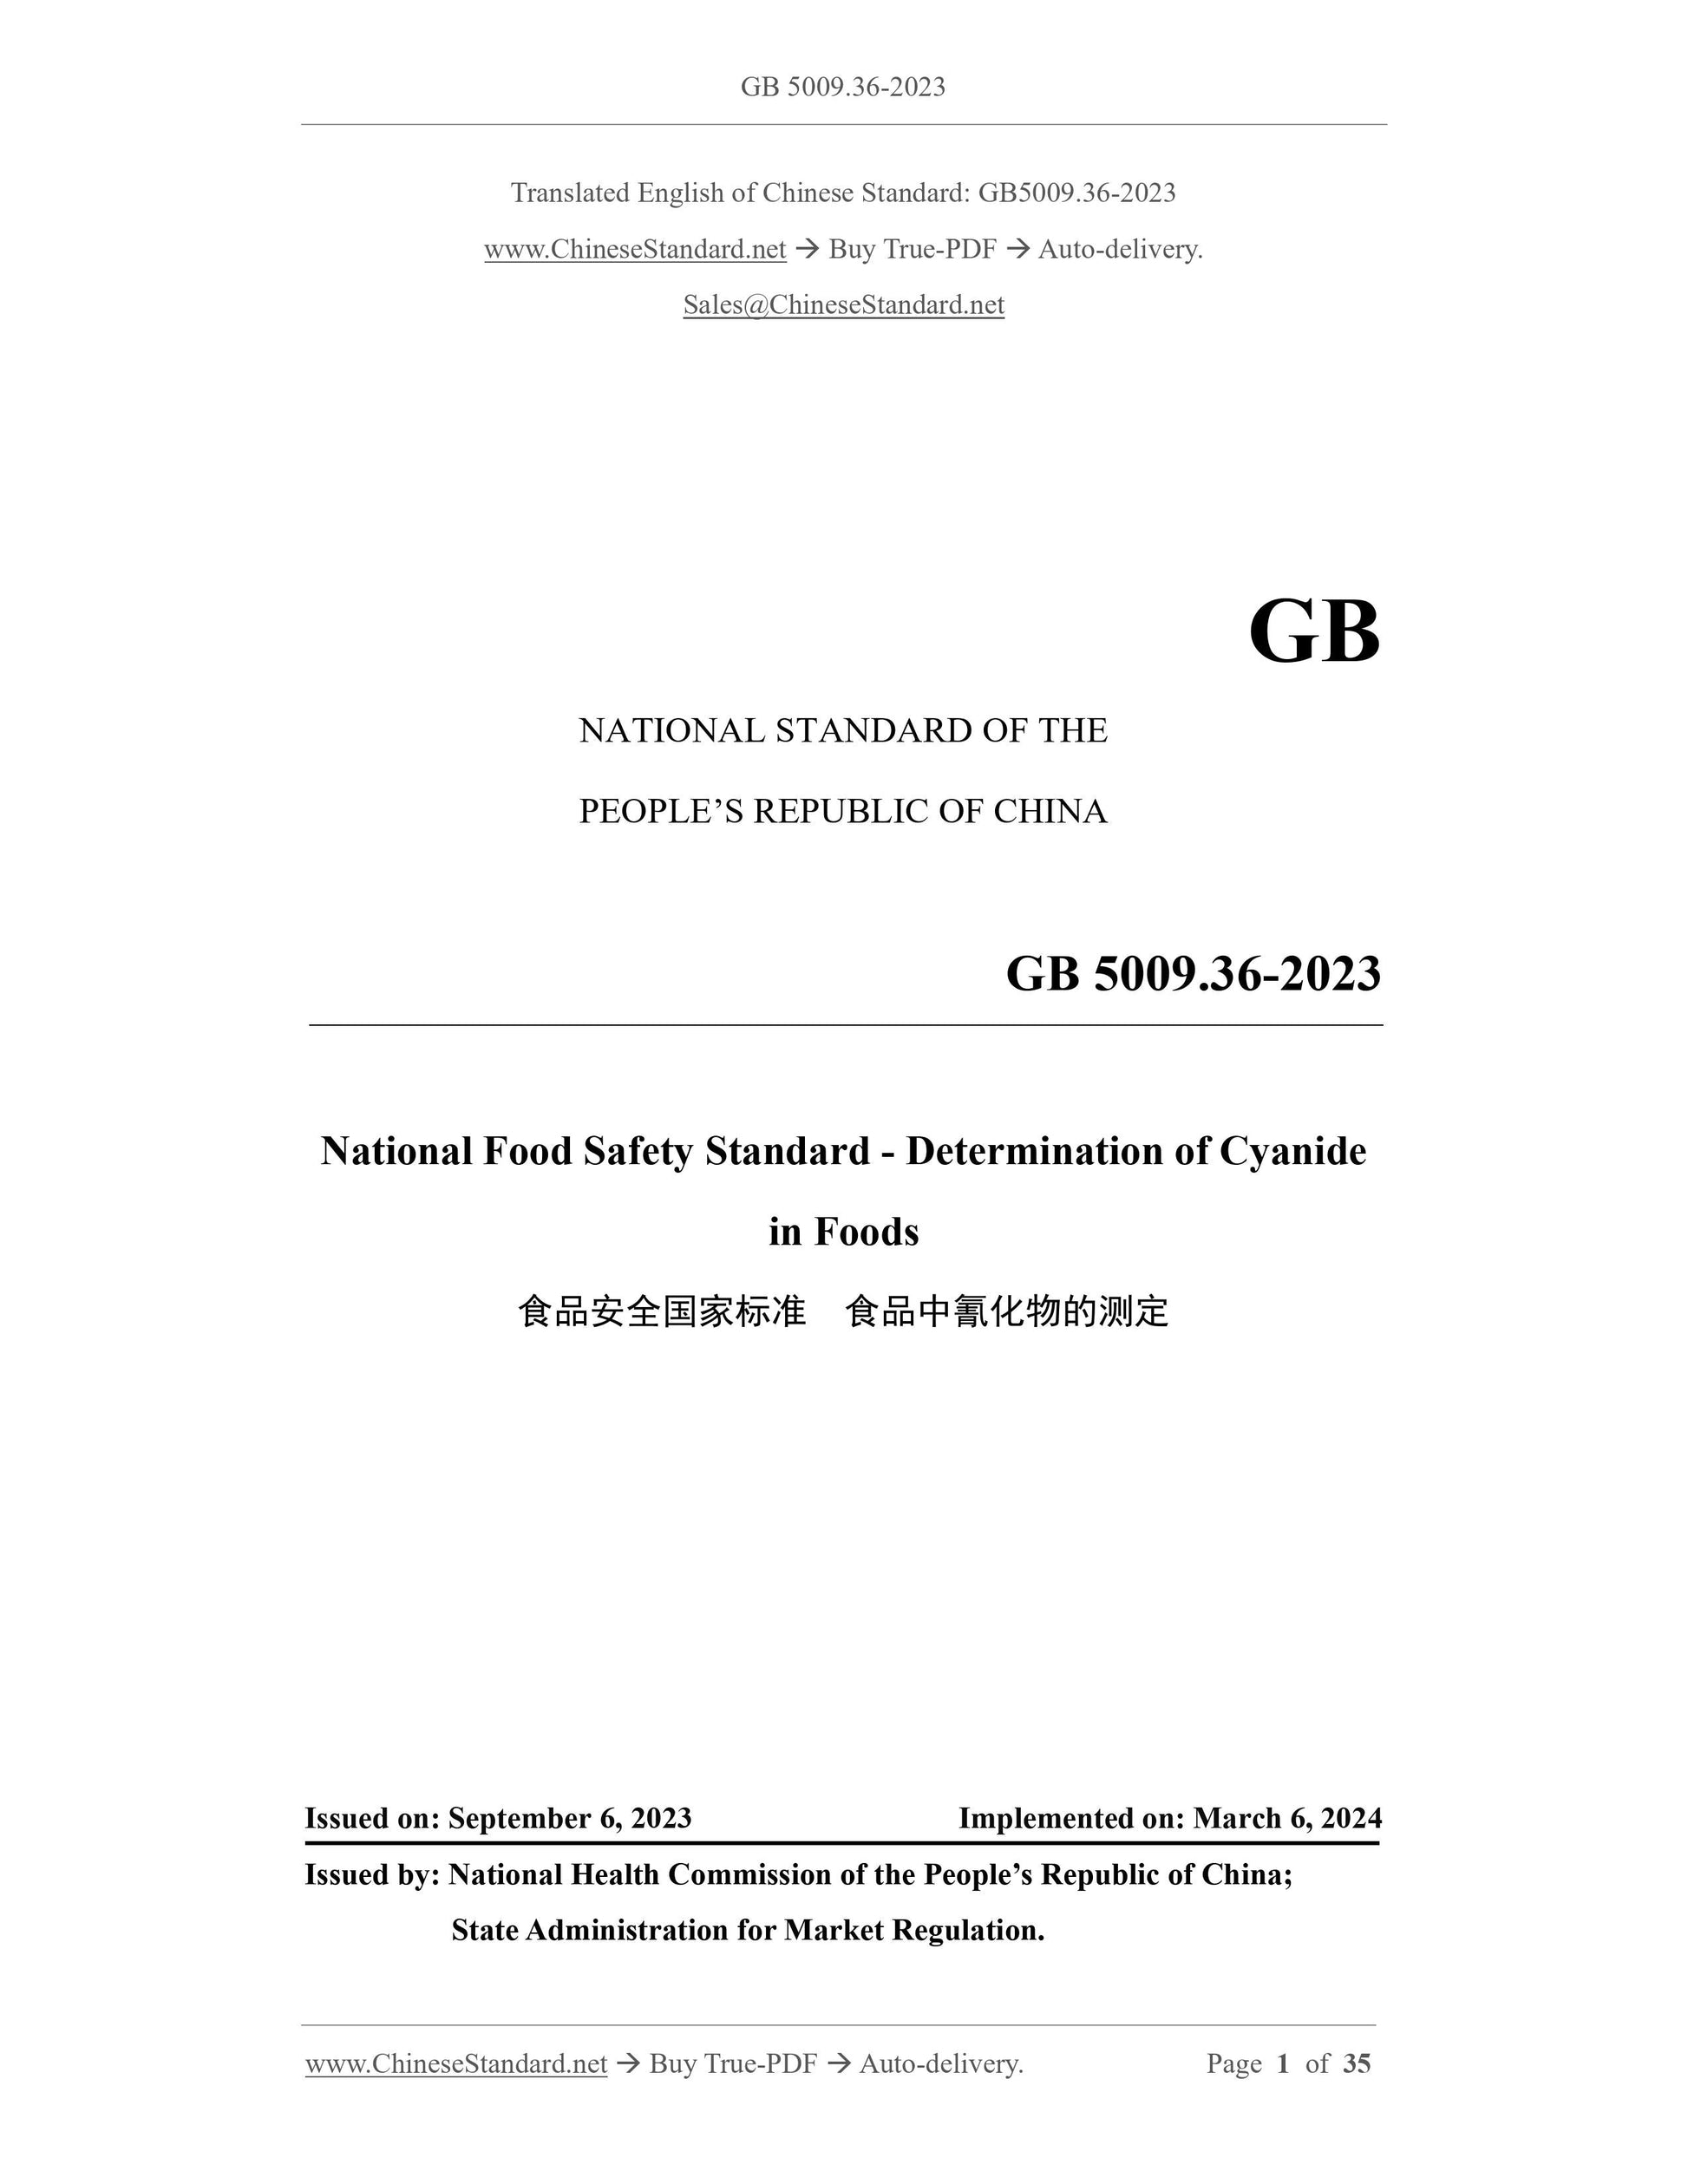 GB 5009.36-2023 Page 1